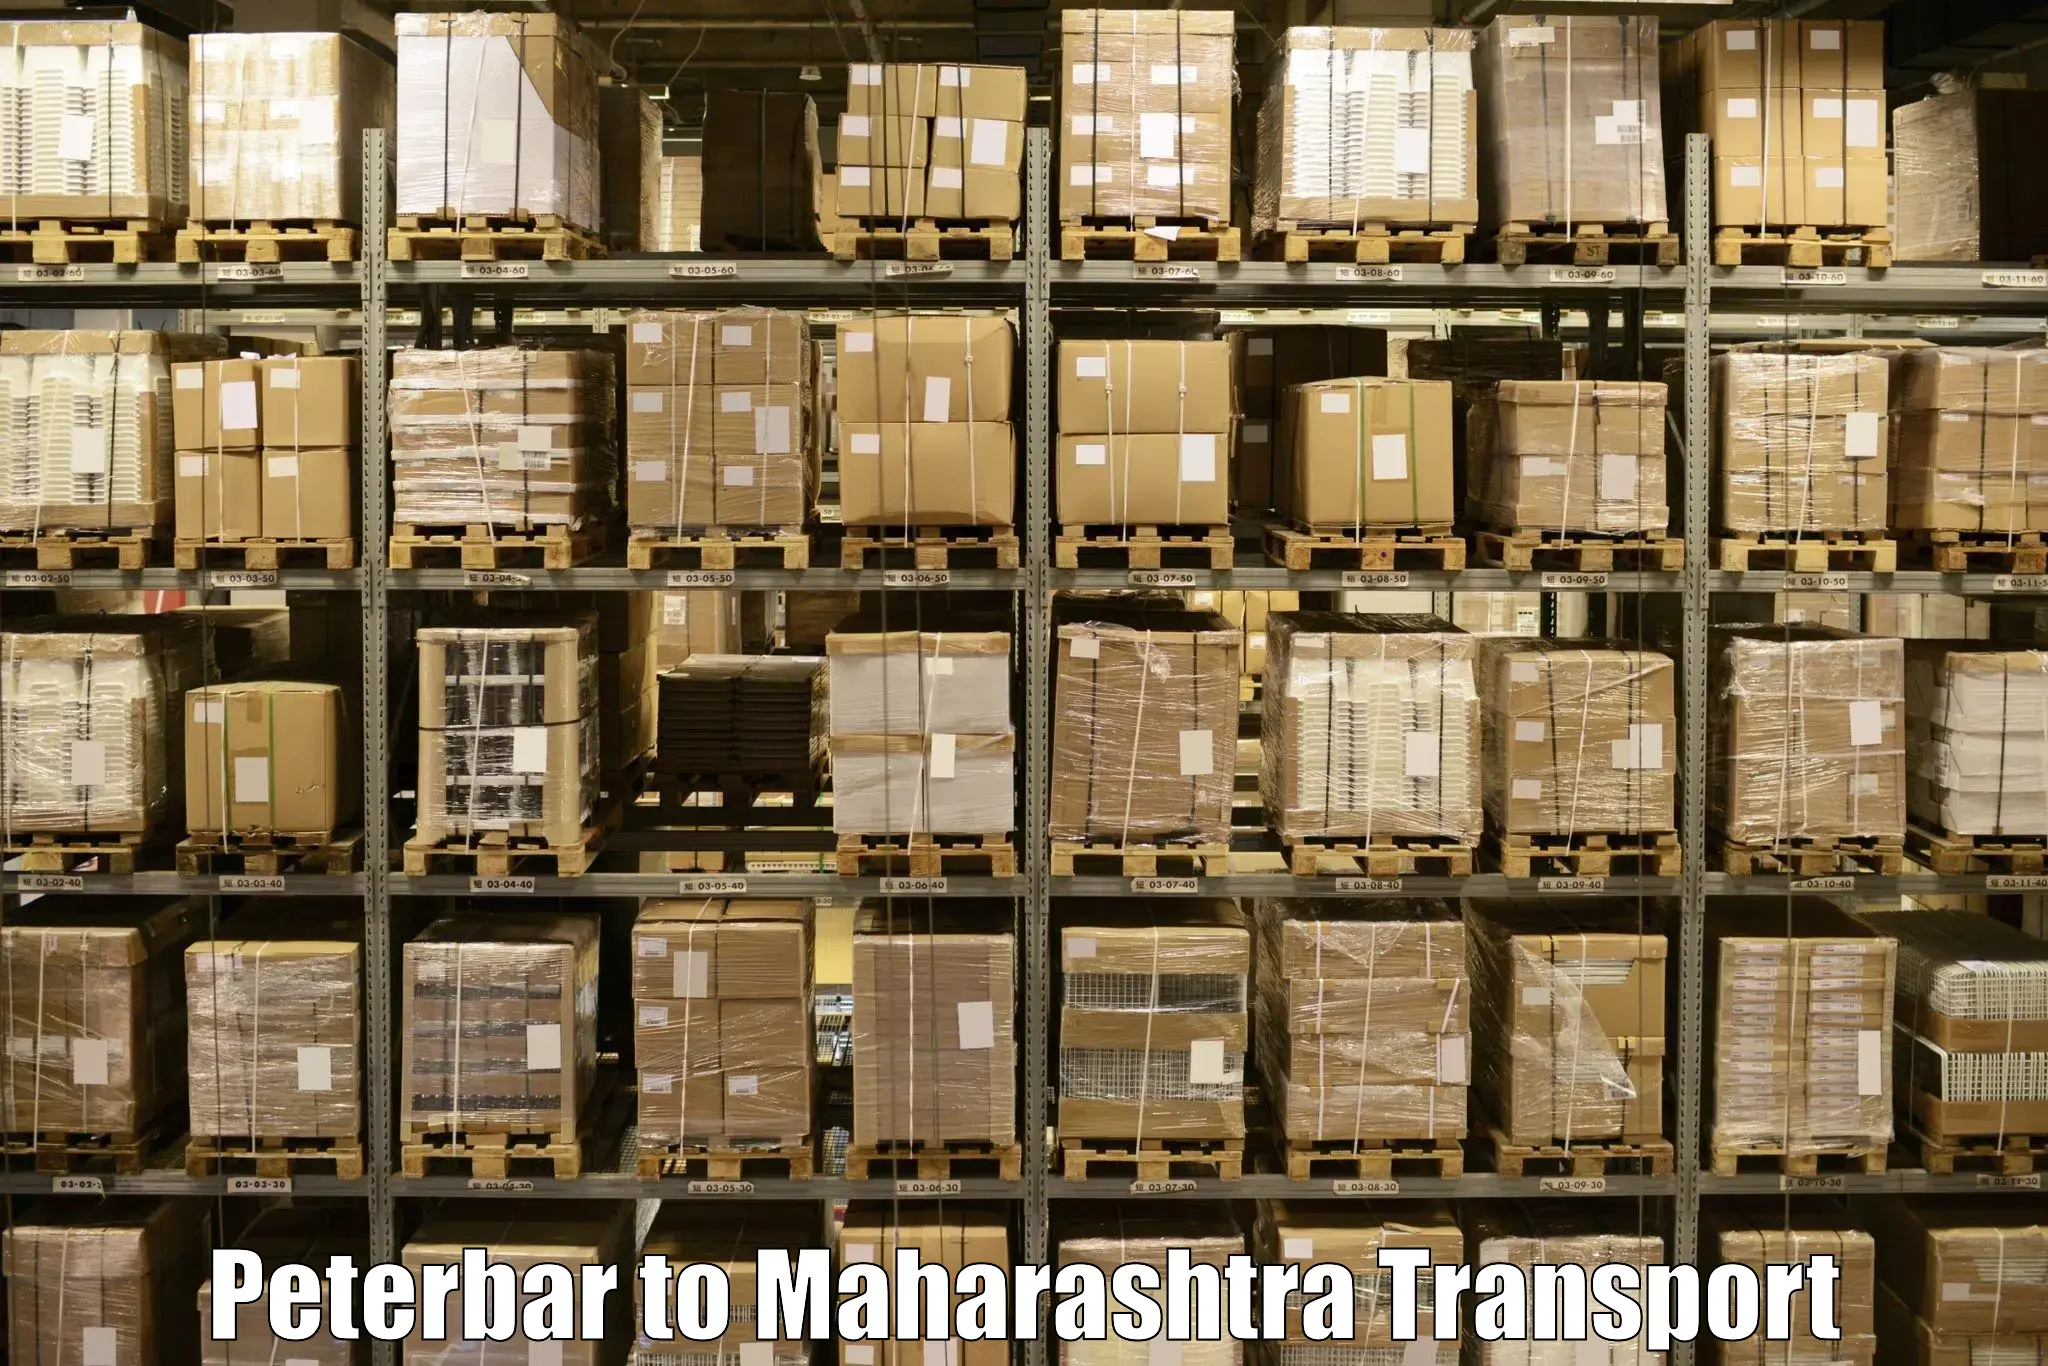 Cargo train transport services Peterbar to Shegaon